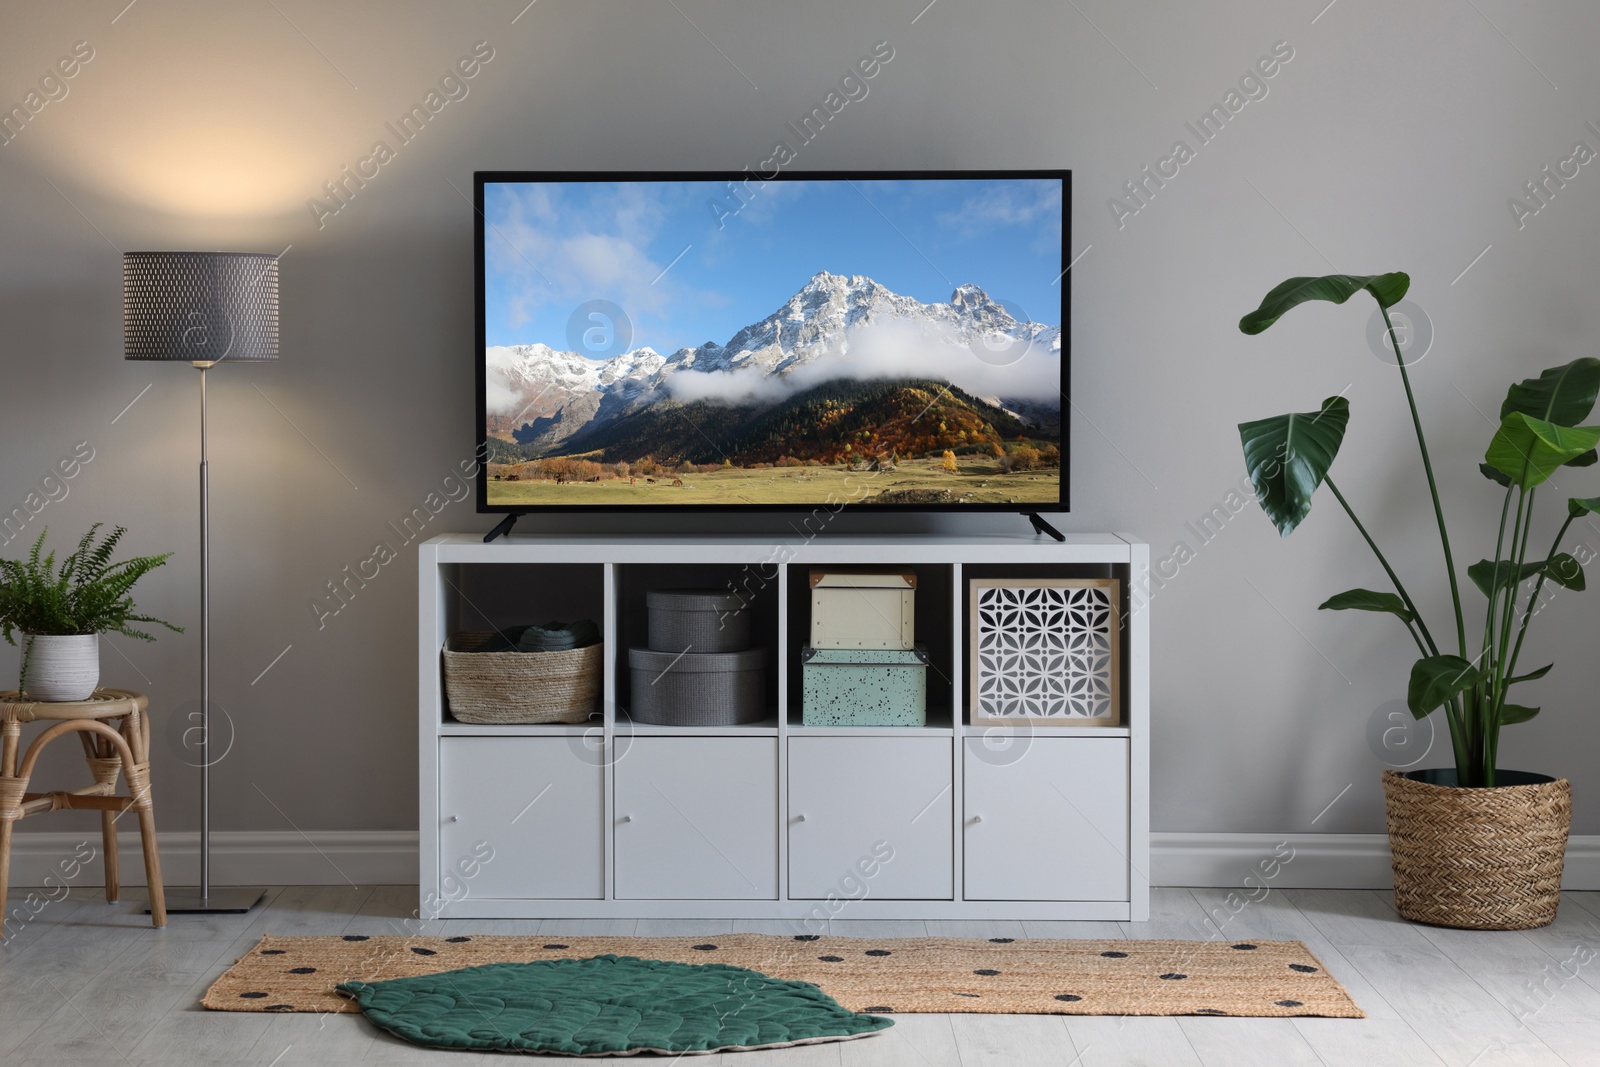 Image of Mountain landscape on TV screen in room